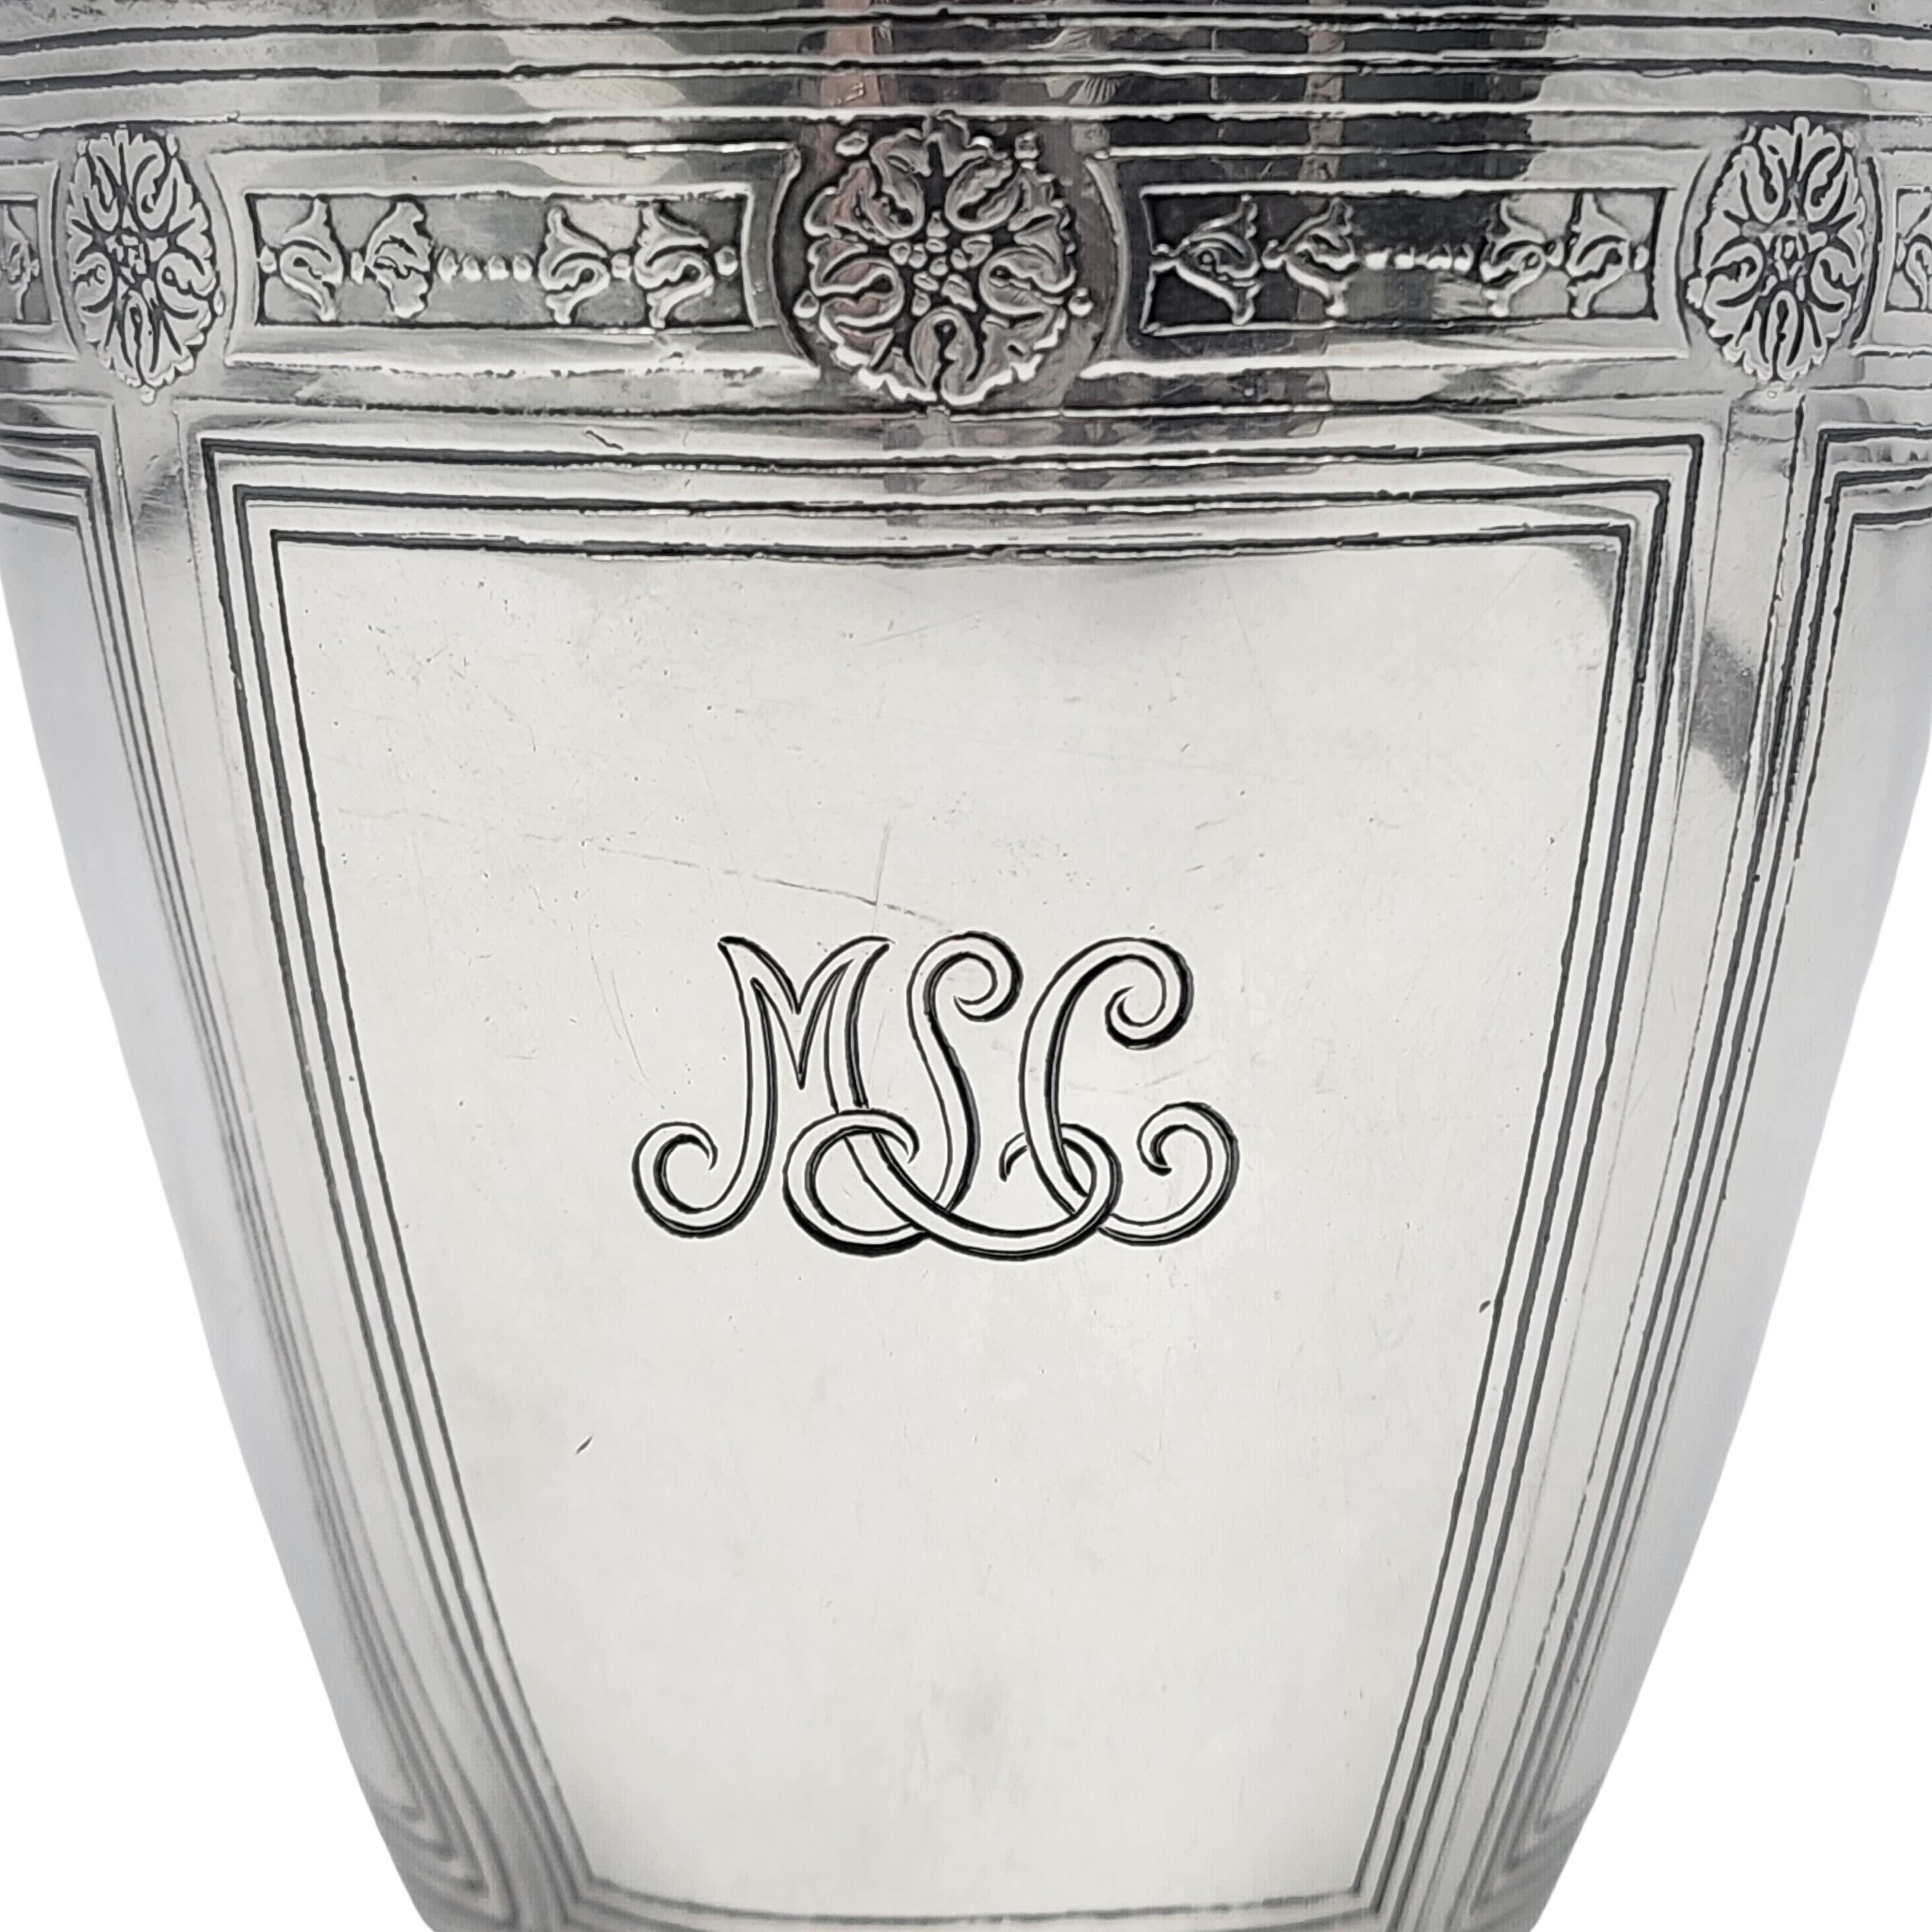 Tiffany & Co Sterling Silver Tea Caddy with Monogram #16850 For Sale 3